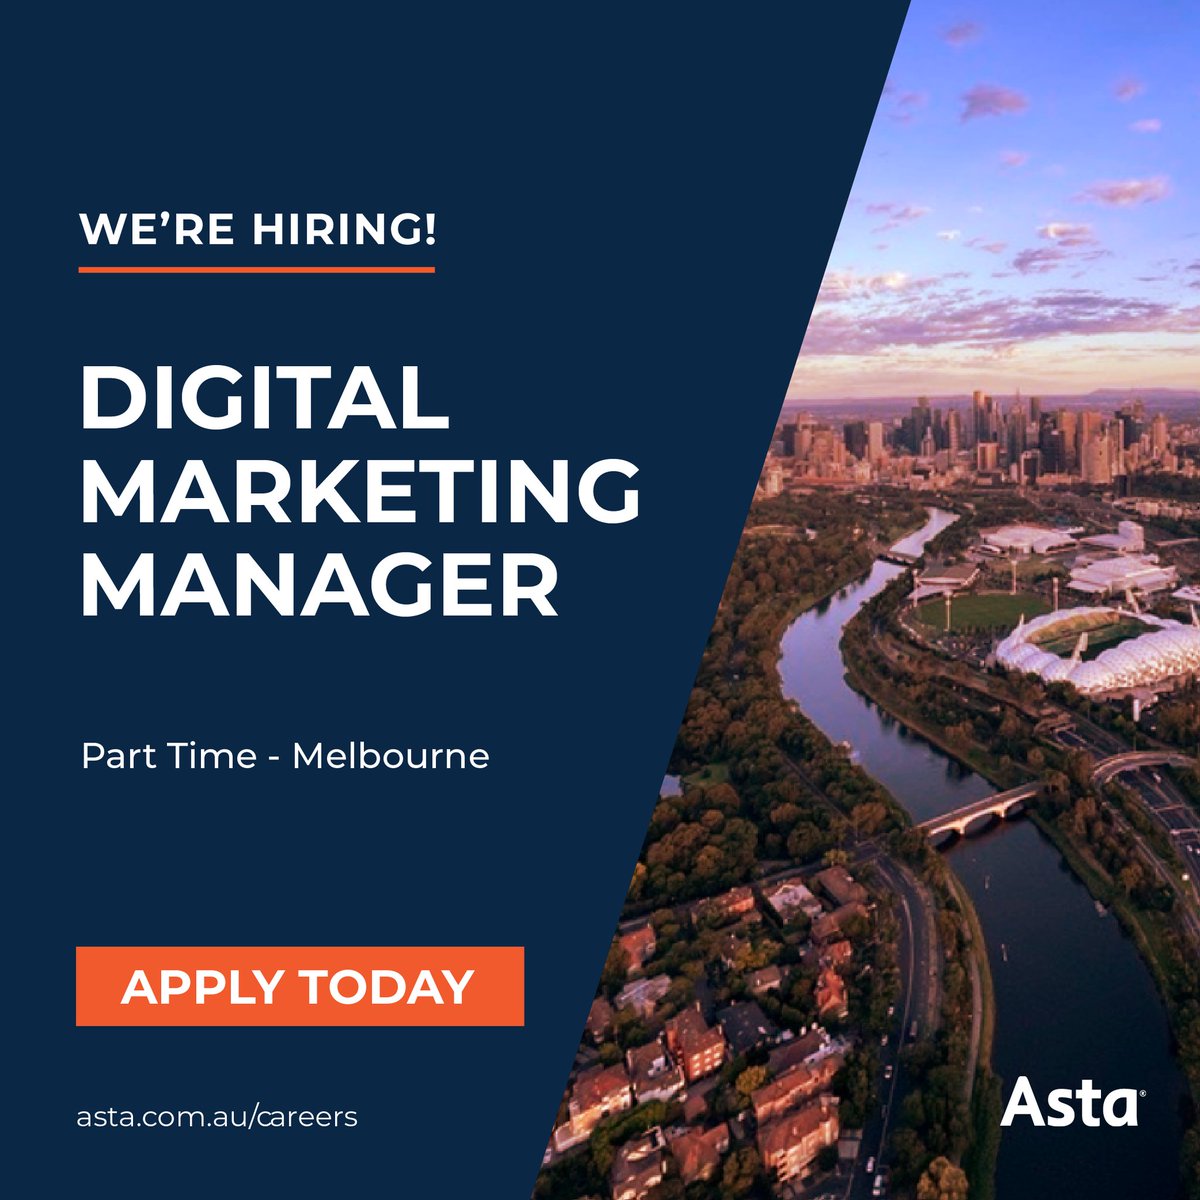 Asta are looking for a Digital Marketing Manager to join our team!

Learn more about the tasks and responsibilities here:
seek.com.au/job/67123150?t…

#Hiring #ITCareers #MelbourneJobs #DigitalMarketing #Recruitment #SEO #SocialMedia #Web3 #IT #Web3Marketing